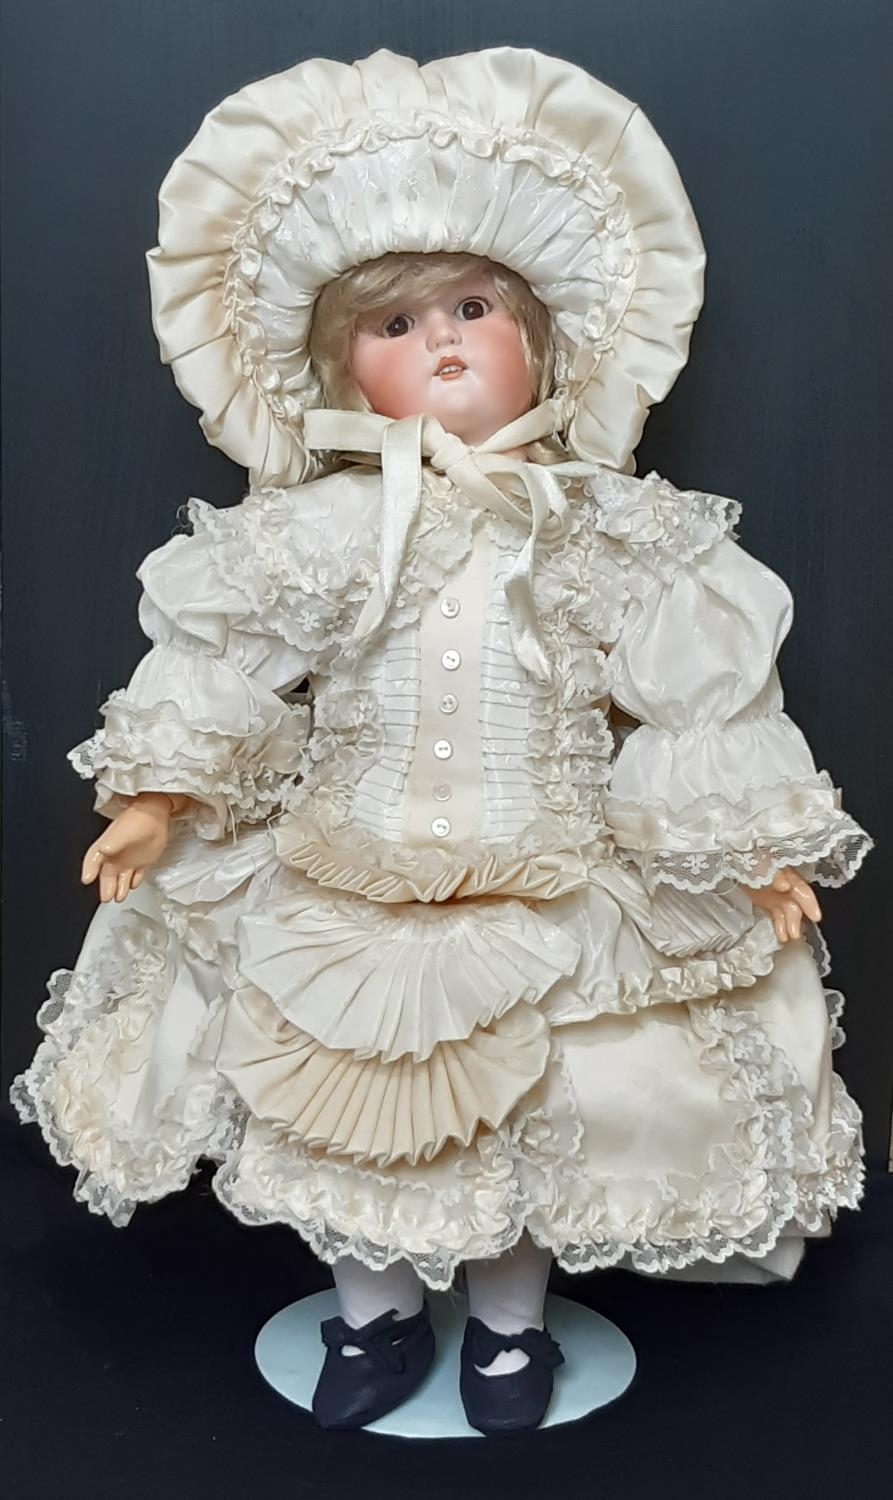 Early 20th century bisque head doll with closing brown eyes, open mouth with teeth and jointed